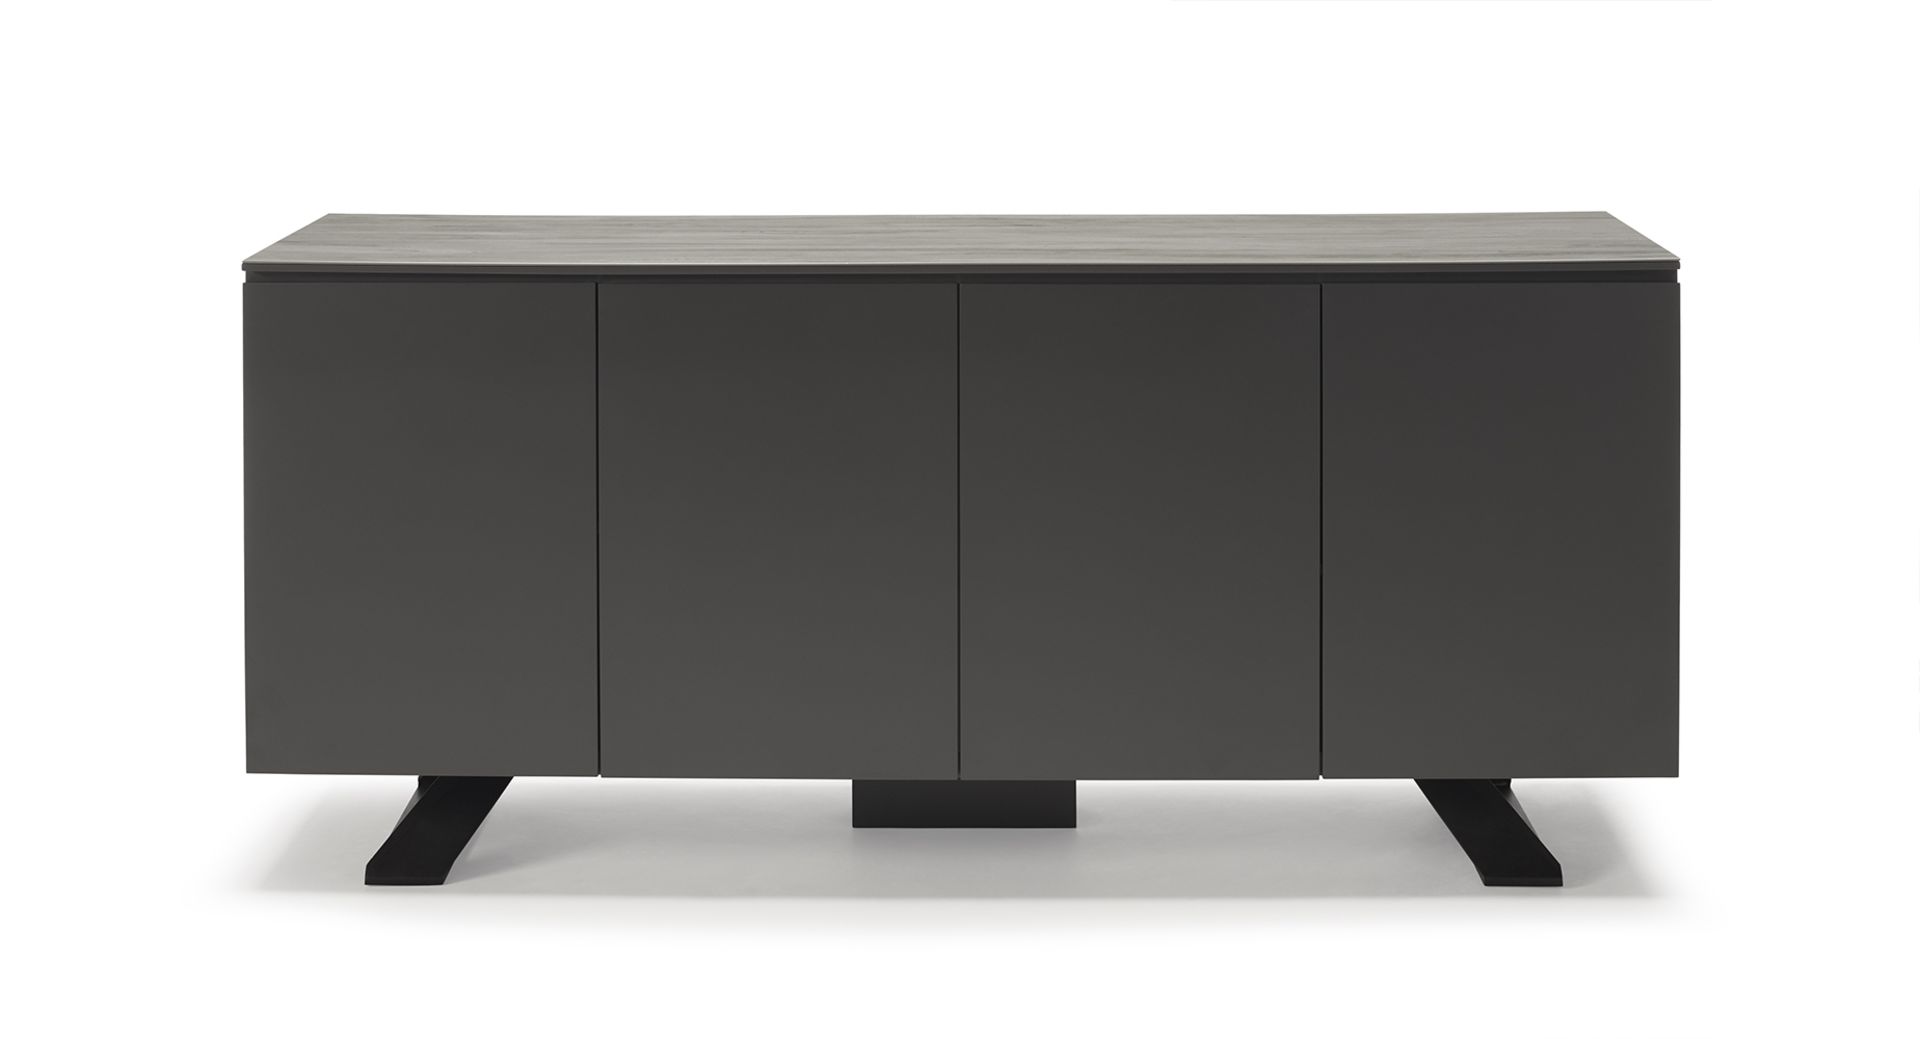 Spartan Sideboard by Kesterport The Spartan Four Door Sideboard provides is striking as a stand - Bild 11 aus 12